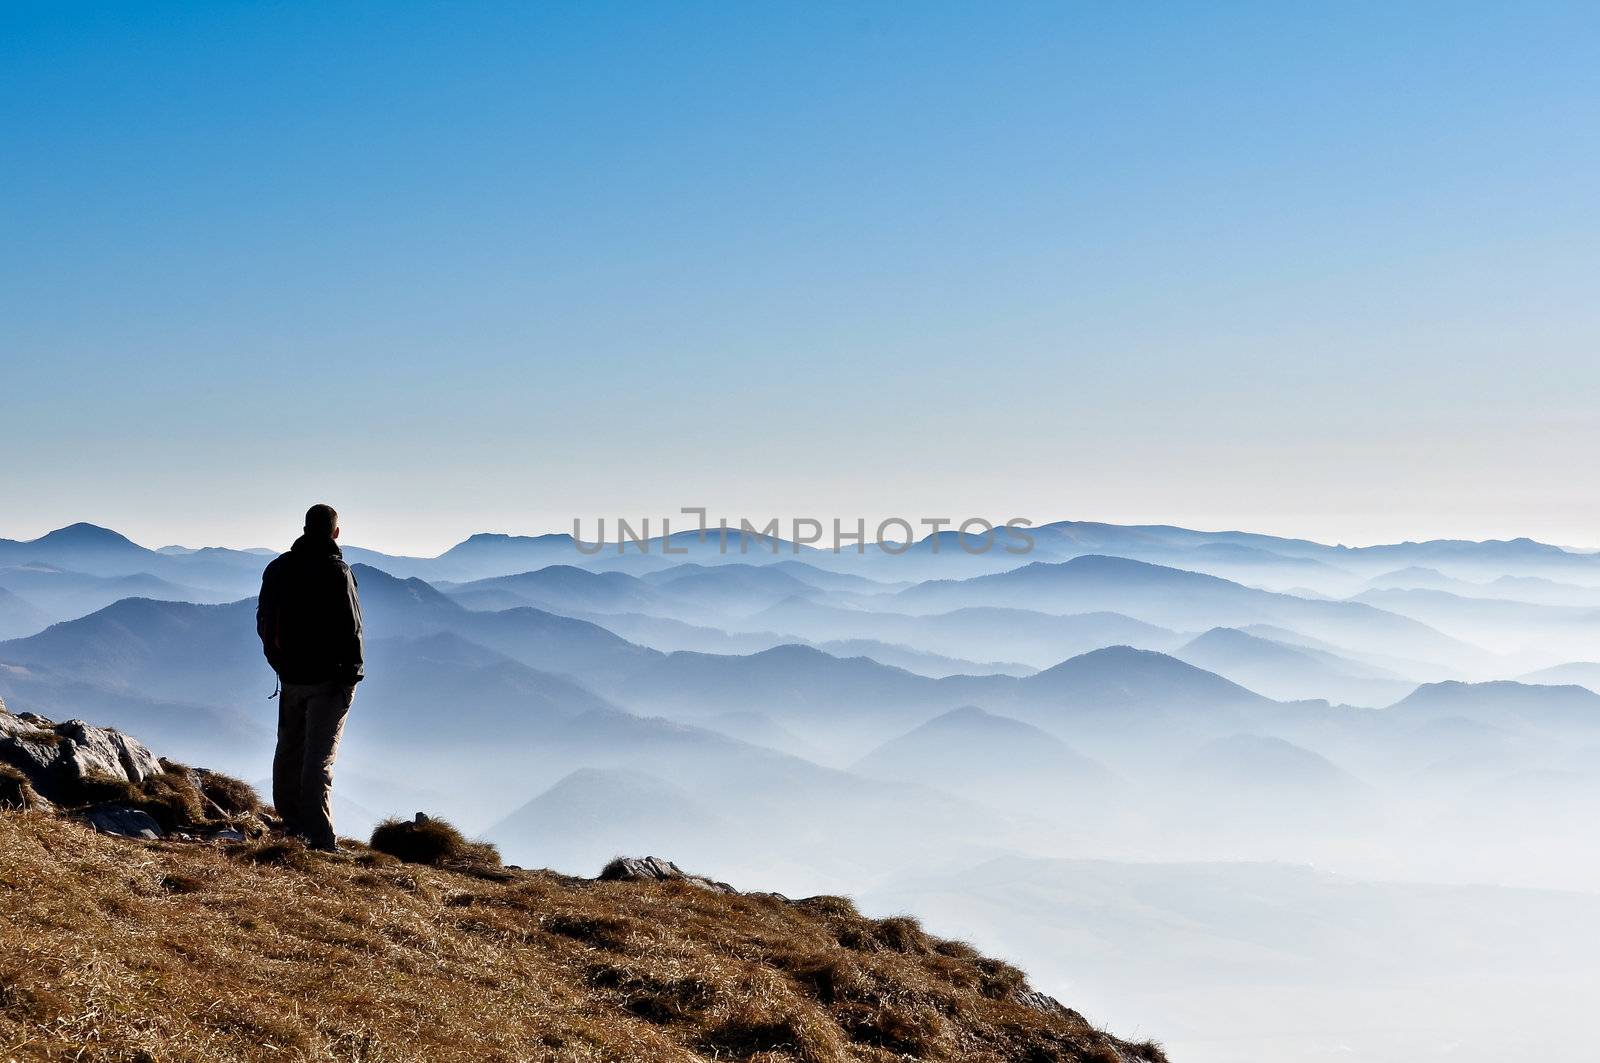 Misty mountain hills and man silhouette overlooking foggy mountains